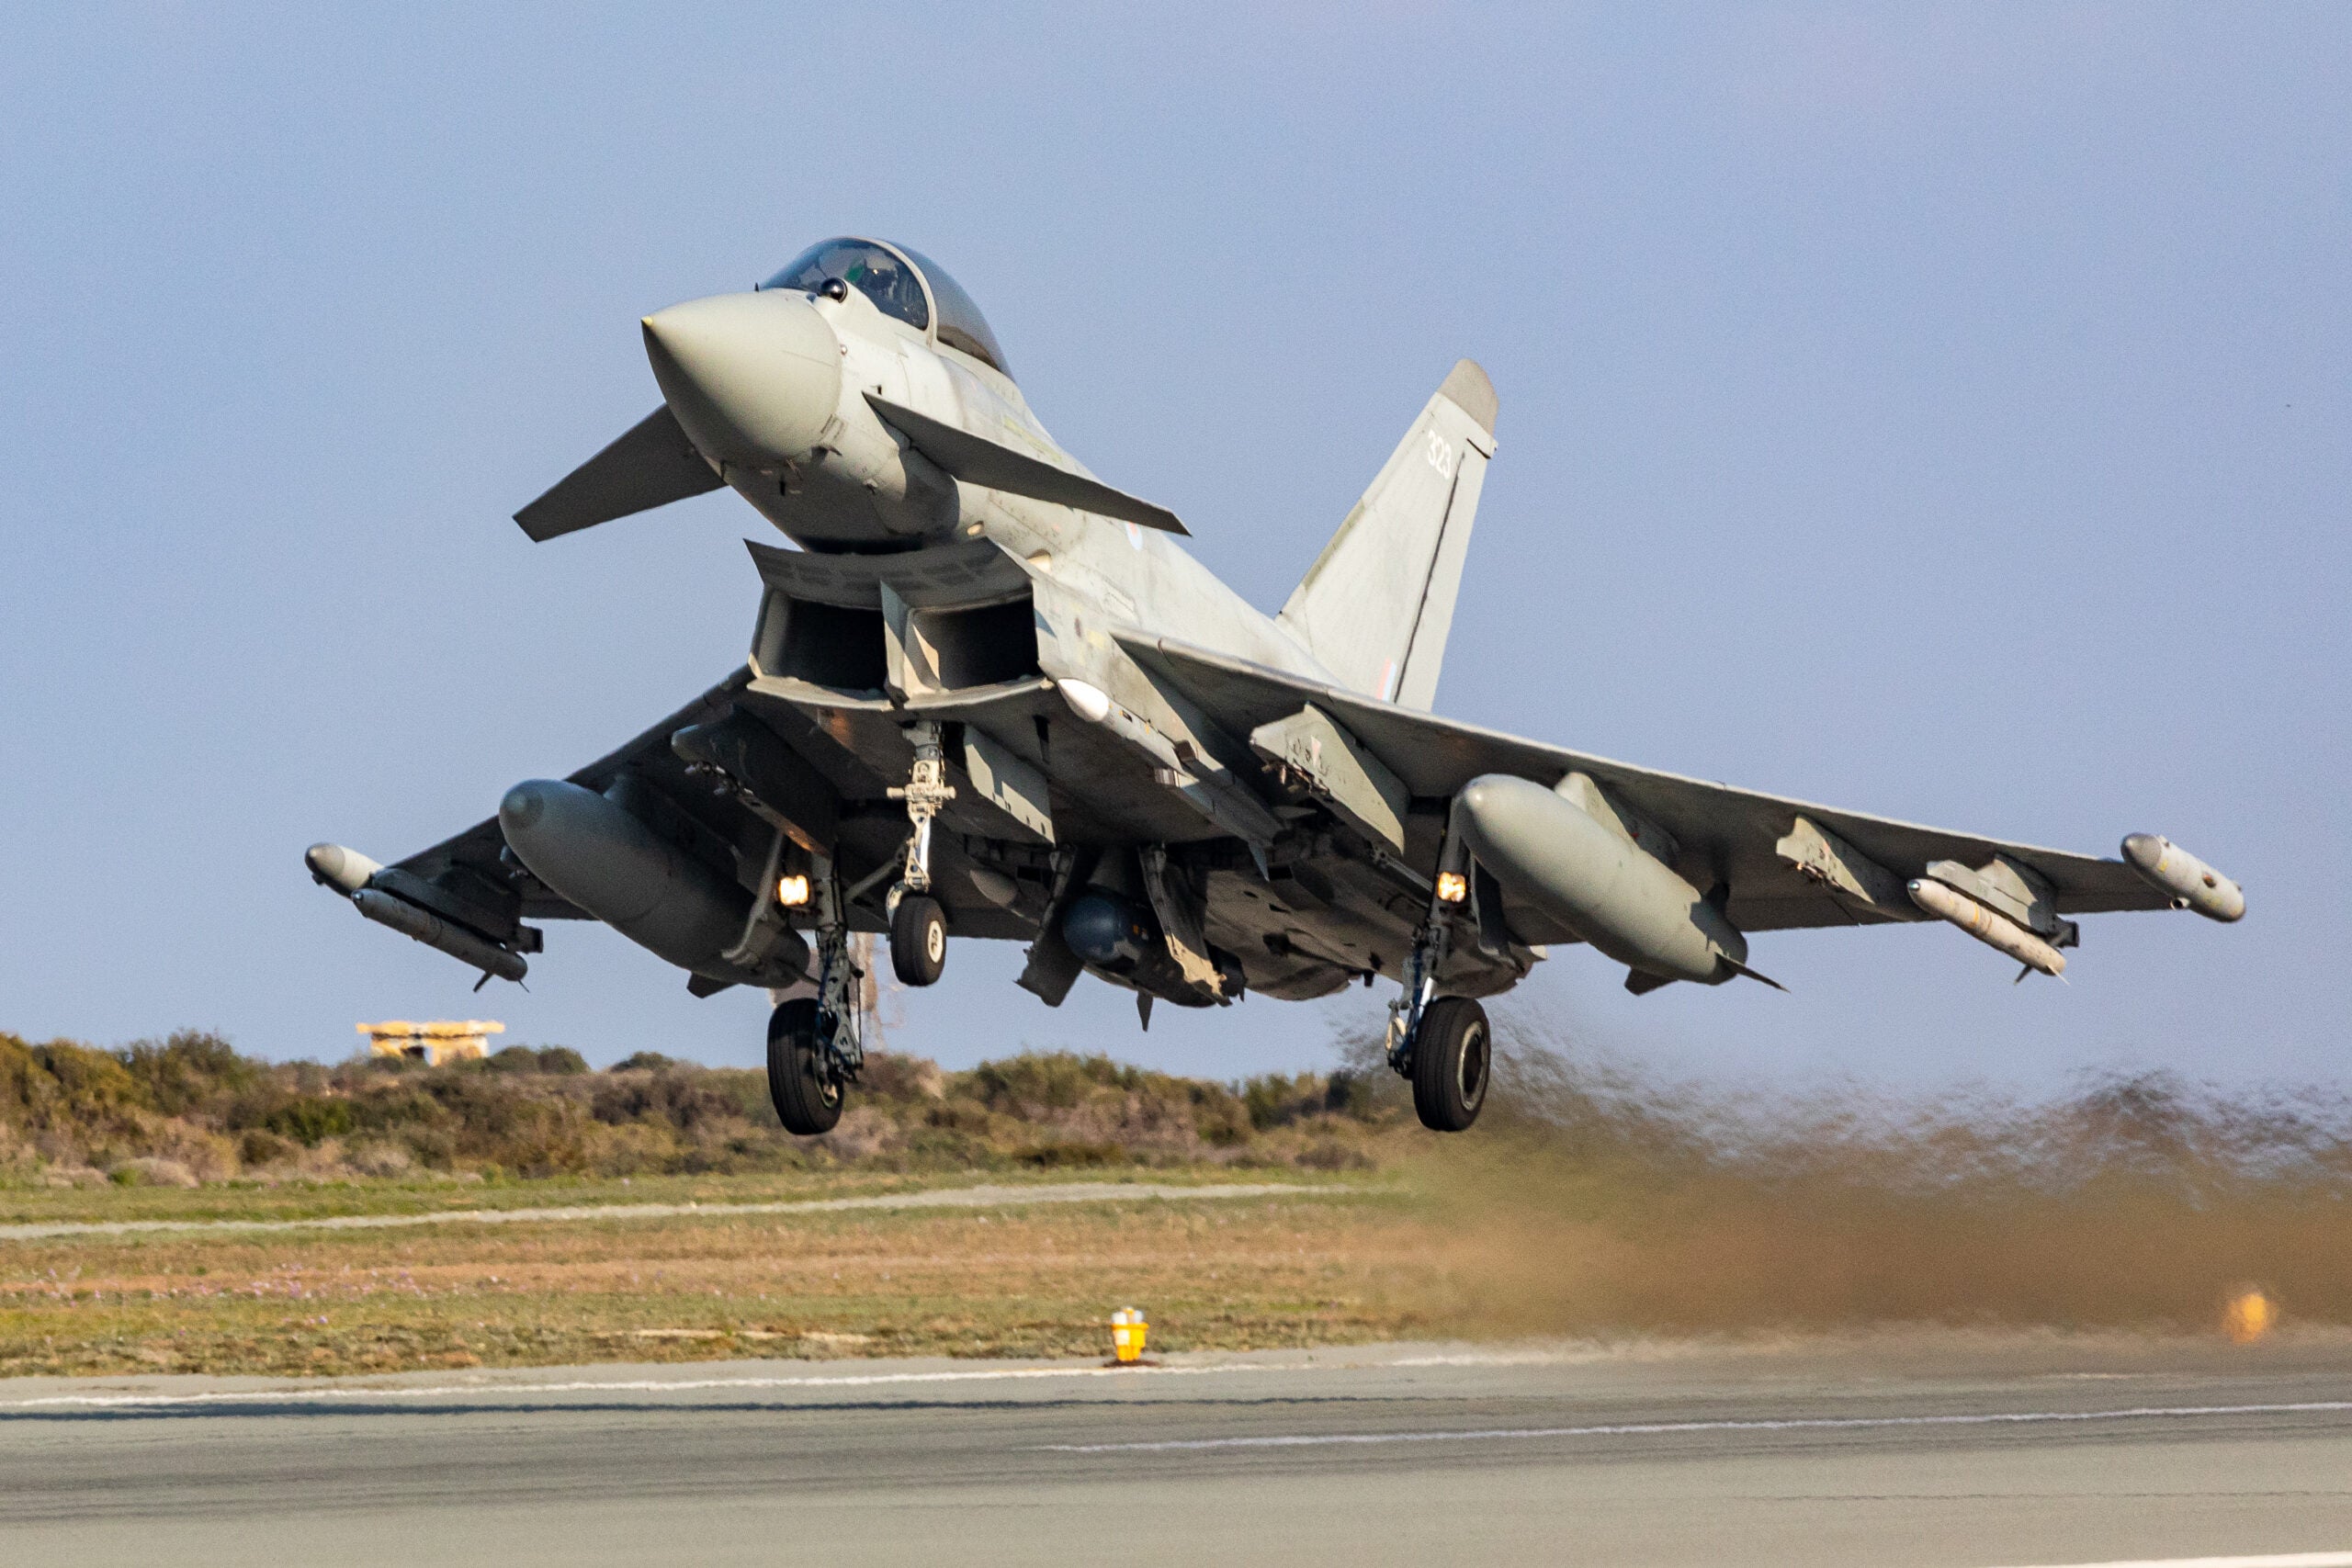 Pictured: A Royal Air Force Typhoon fighter jet takes off from RAF Akrotiri.

The Typhoon FGR.Mk 4 is a highly capable and extremely agile fourth-generation multi-role combat aircraft, capable of being deployed for the full spectrum of air operations, including air policing, peace support and high-intensity conflict. The aircraft has a potent, precision multi-role capability. 

The pilot performs many essential functions through the aircrafts hands on throttle and stick (HOTAS) interface which, combined with an advanced cockpit and the Helmet Equipment Assembly (HEA), renders Typhoon superbly equipped for all aspects of air operations.

Although Typhoon has flown precision attack missions in all its combat deployments to date, its most essential role remains the provision of quick reaction alert (QRA) for UK and Falkland Islands airspace.